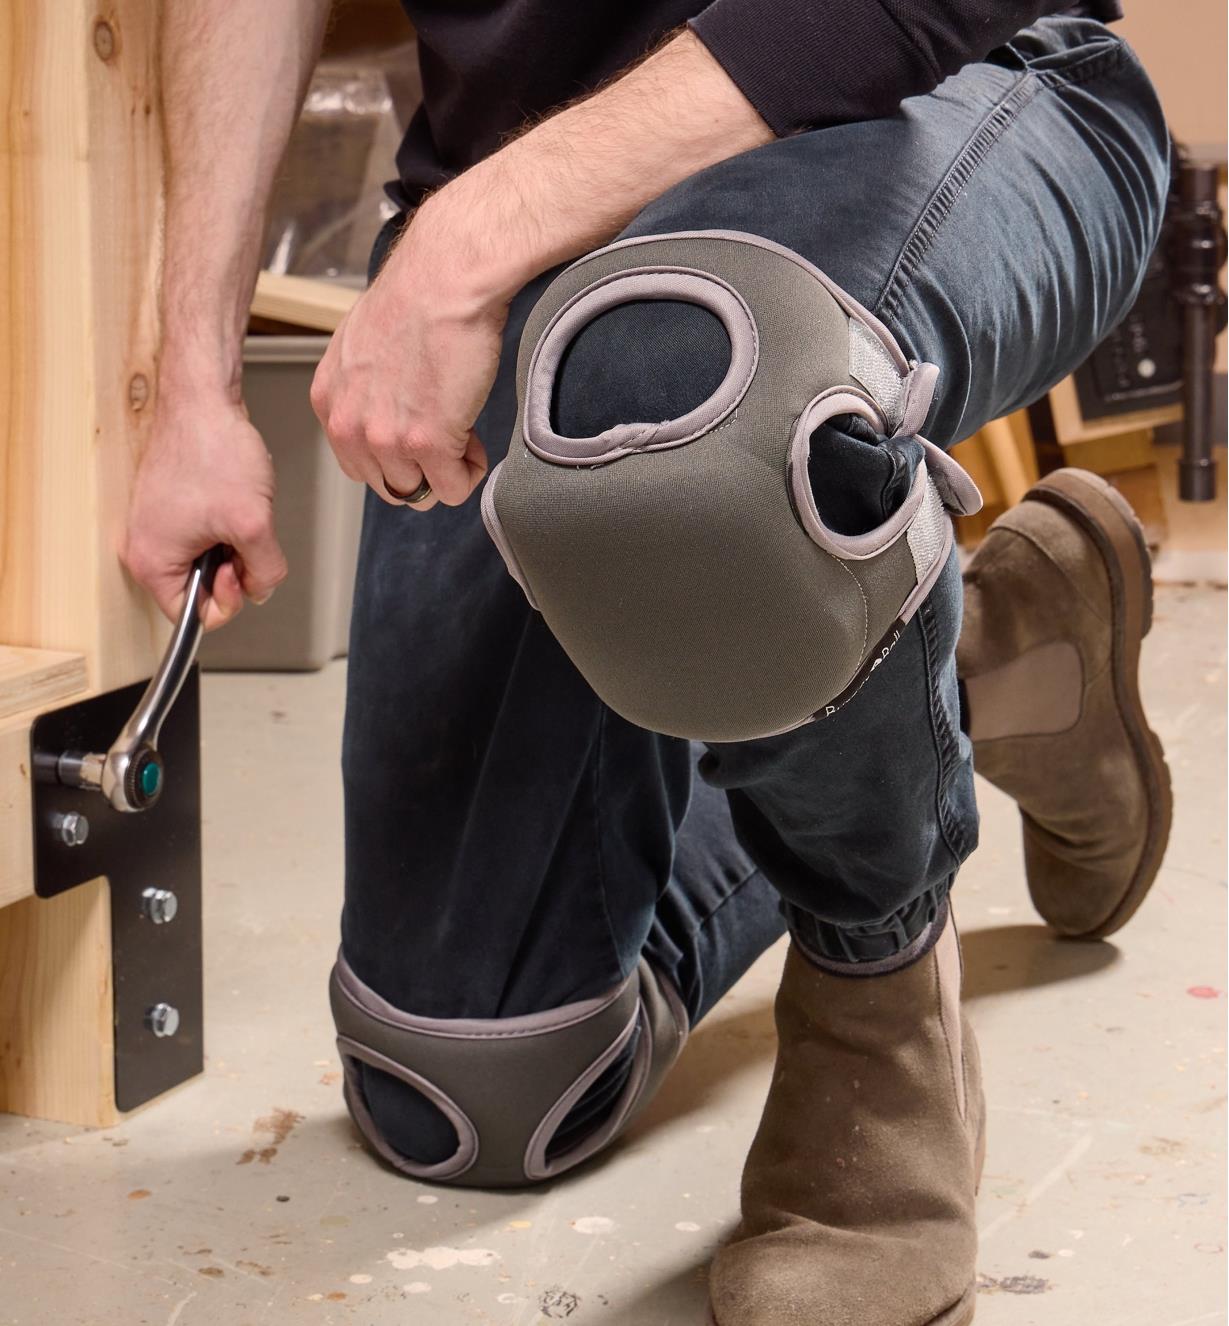 A person wearing memory foam knee pads kneels one a workshop floor while tightening workbench bolts